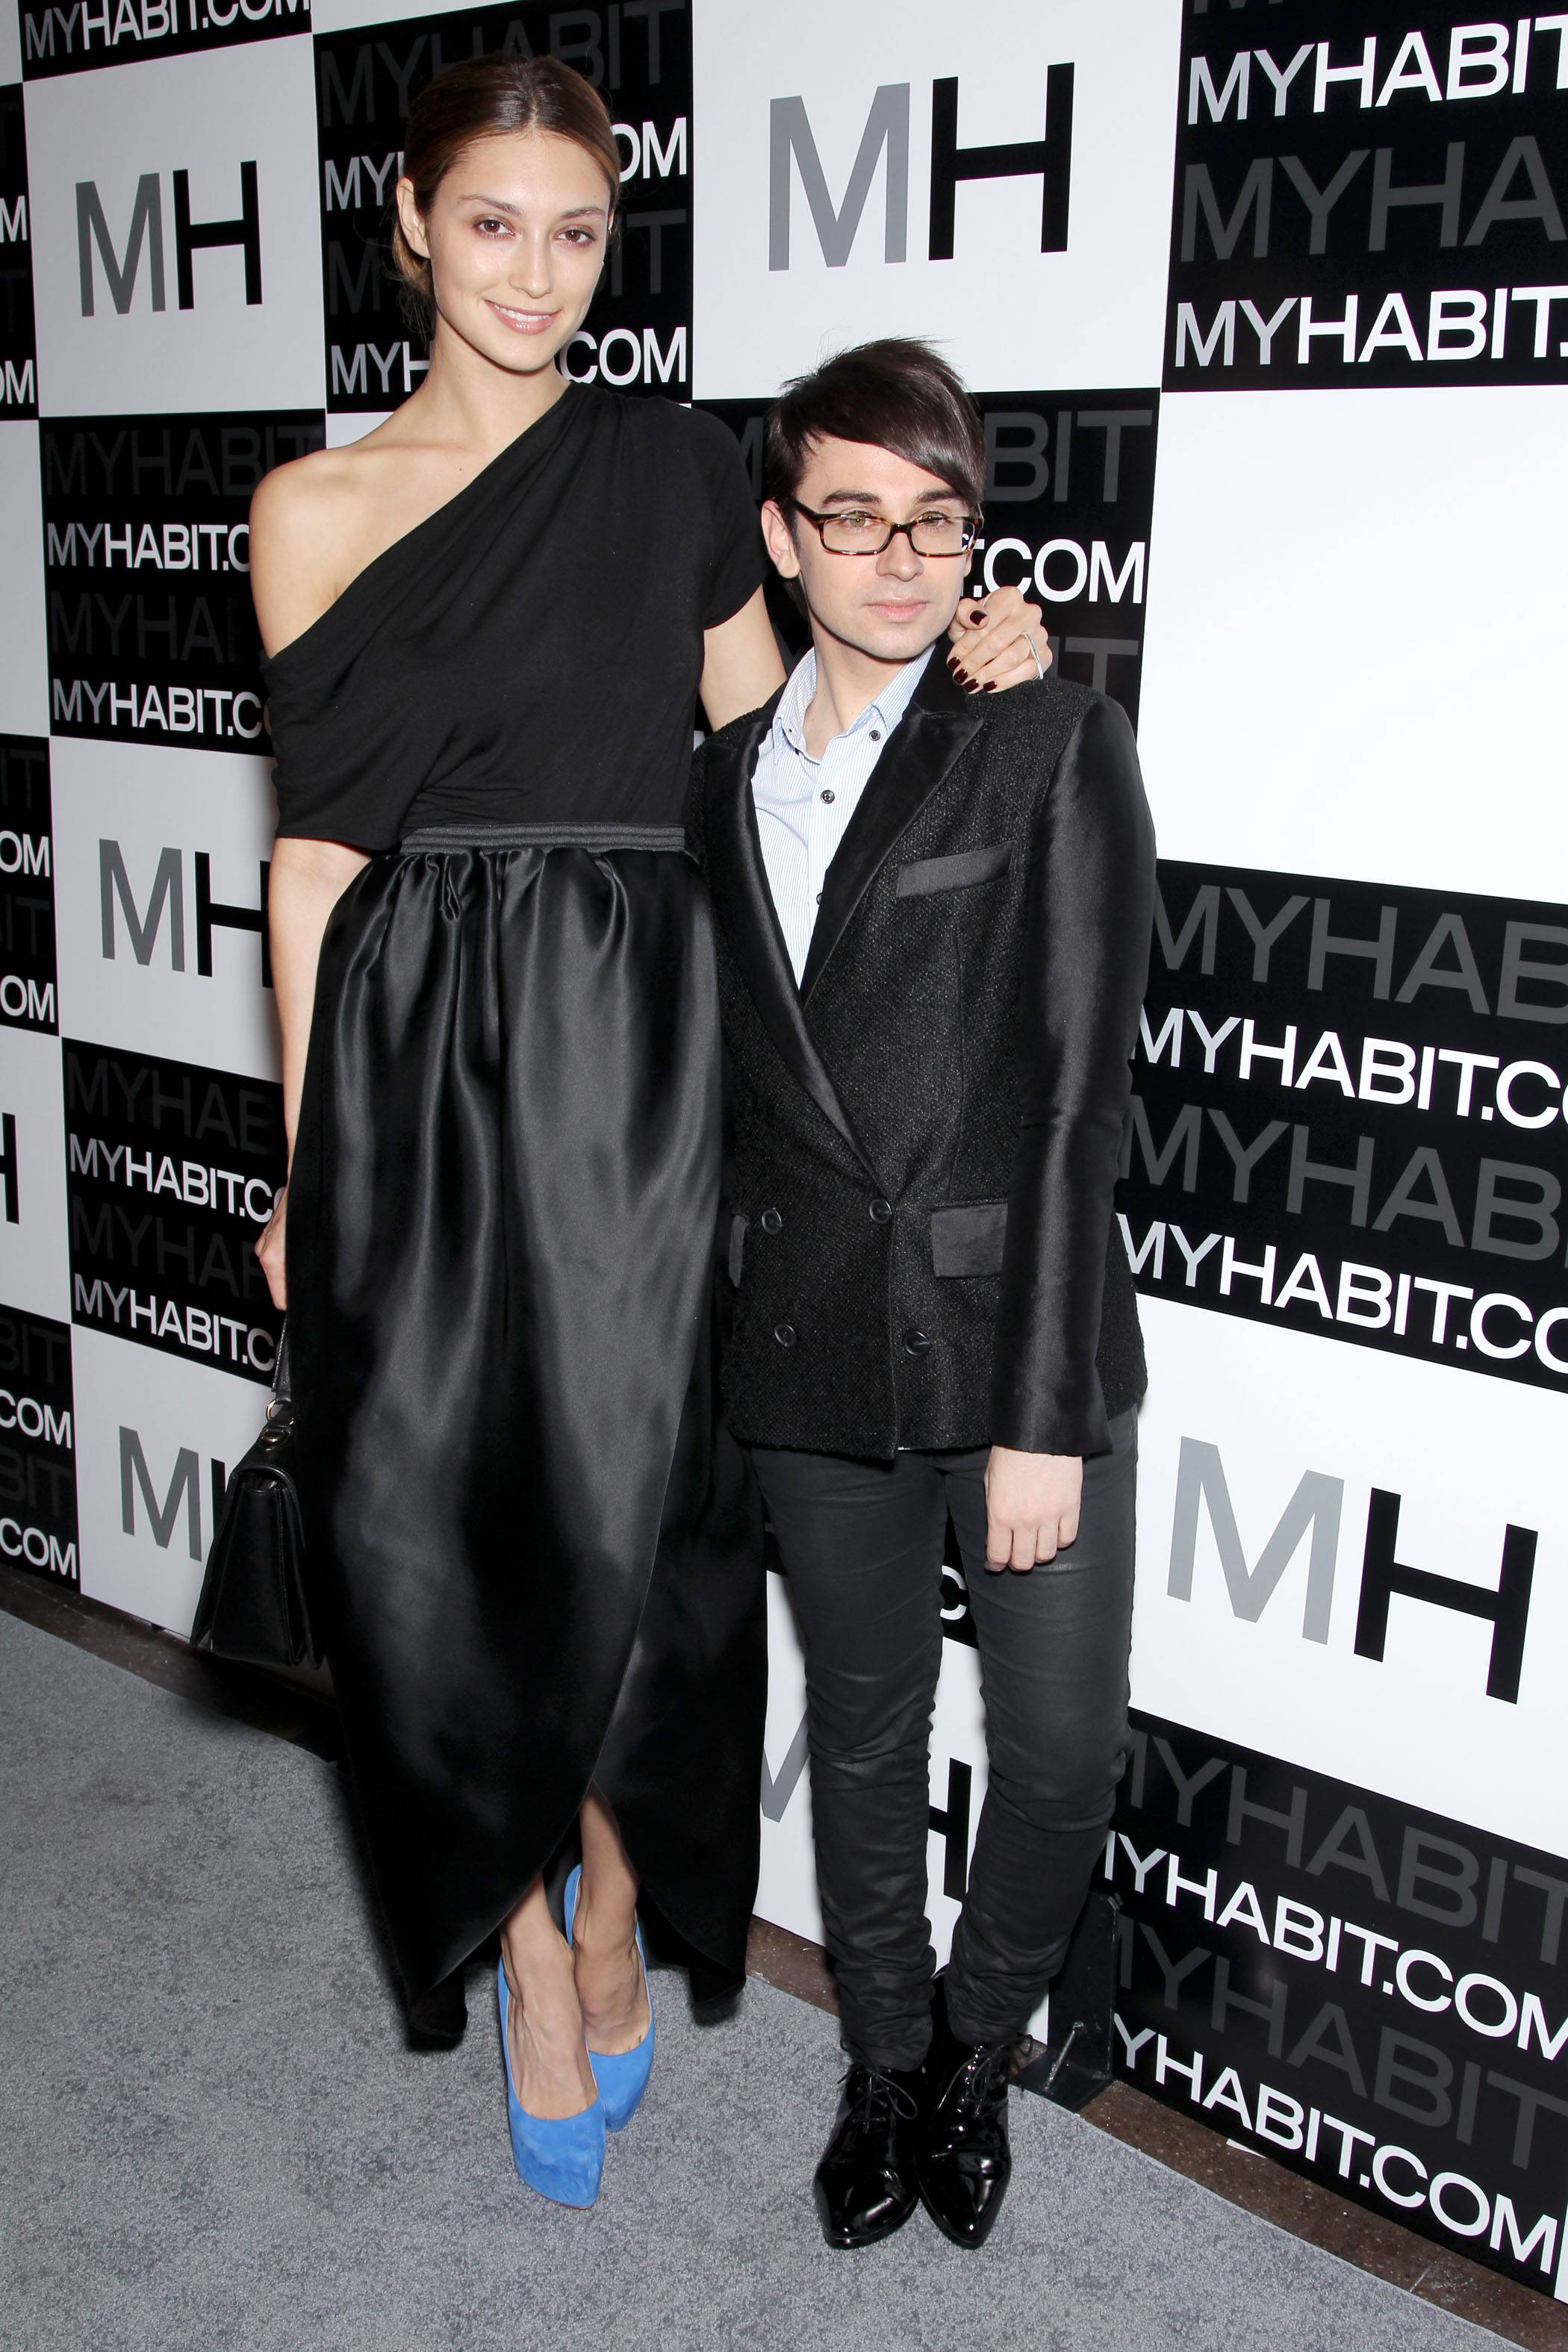 Christian Siriano with Model